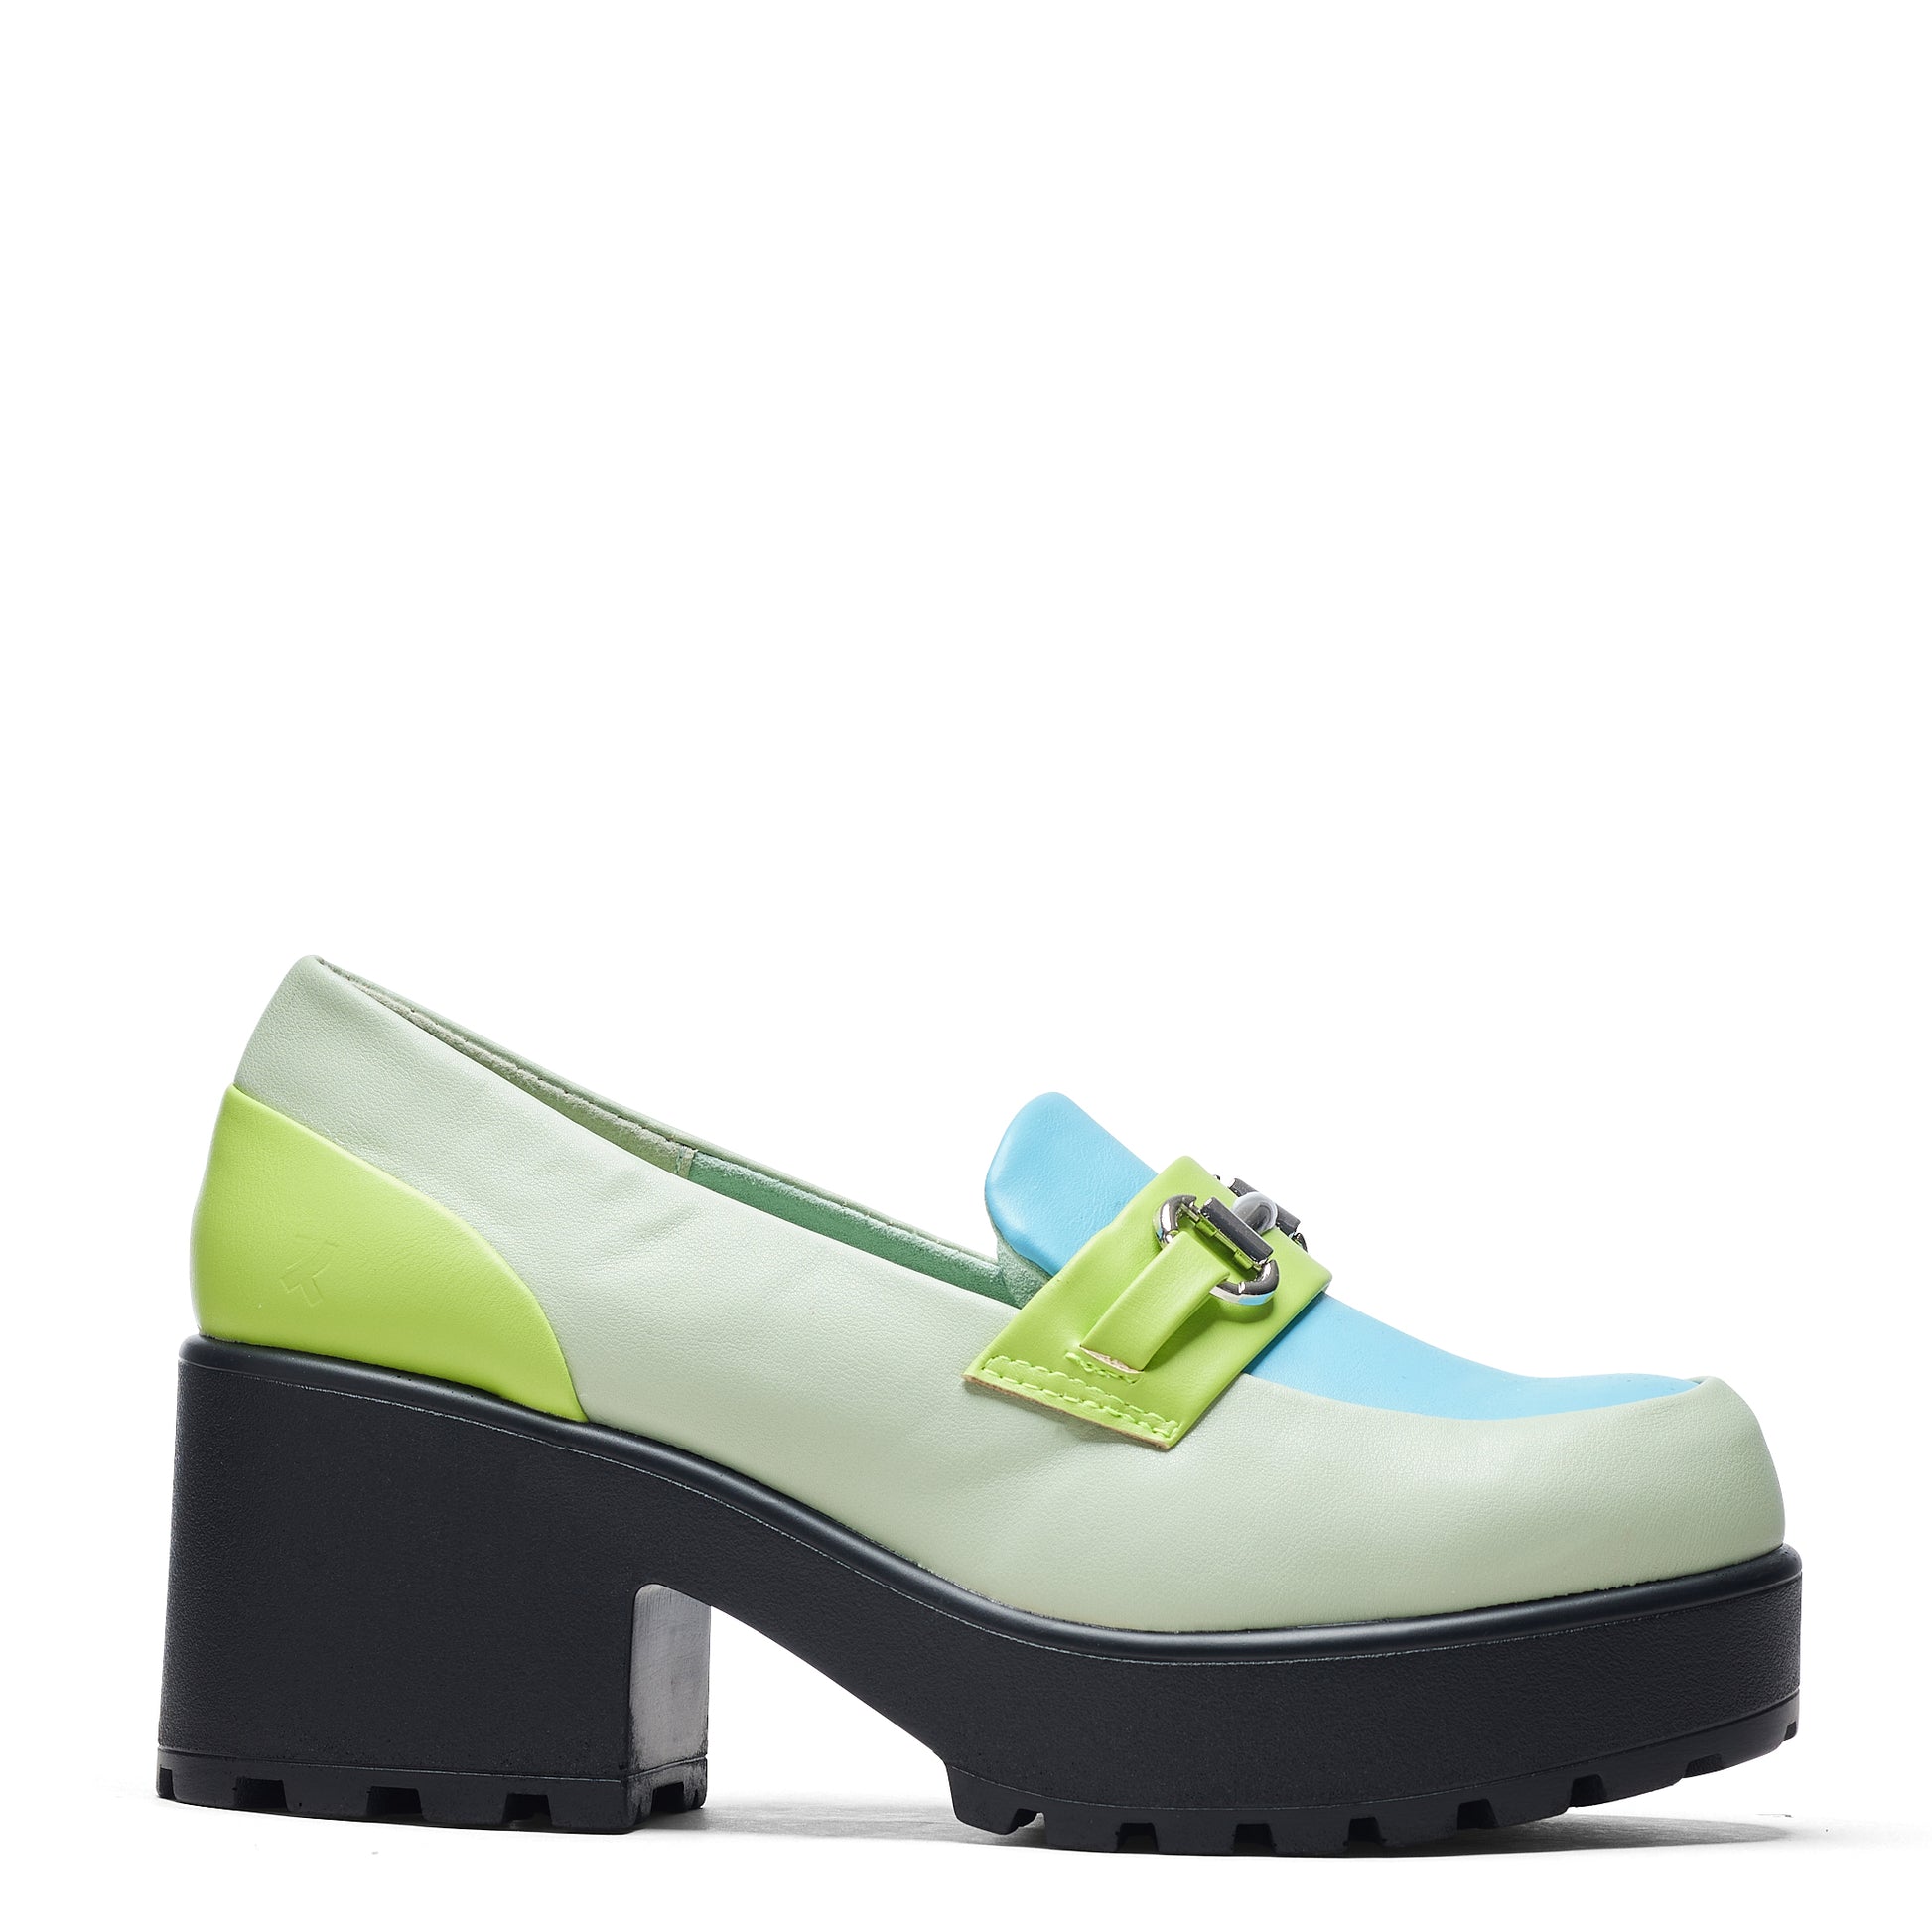 High Class Chunky Shoes - Mint Pastel - Shoes - KOI Footwear - Green - Side View